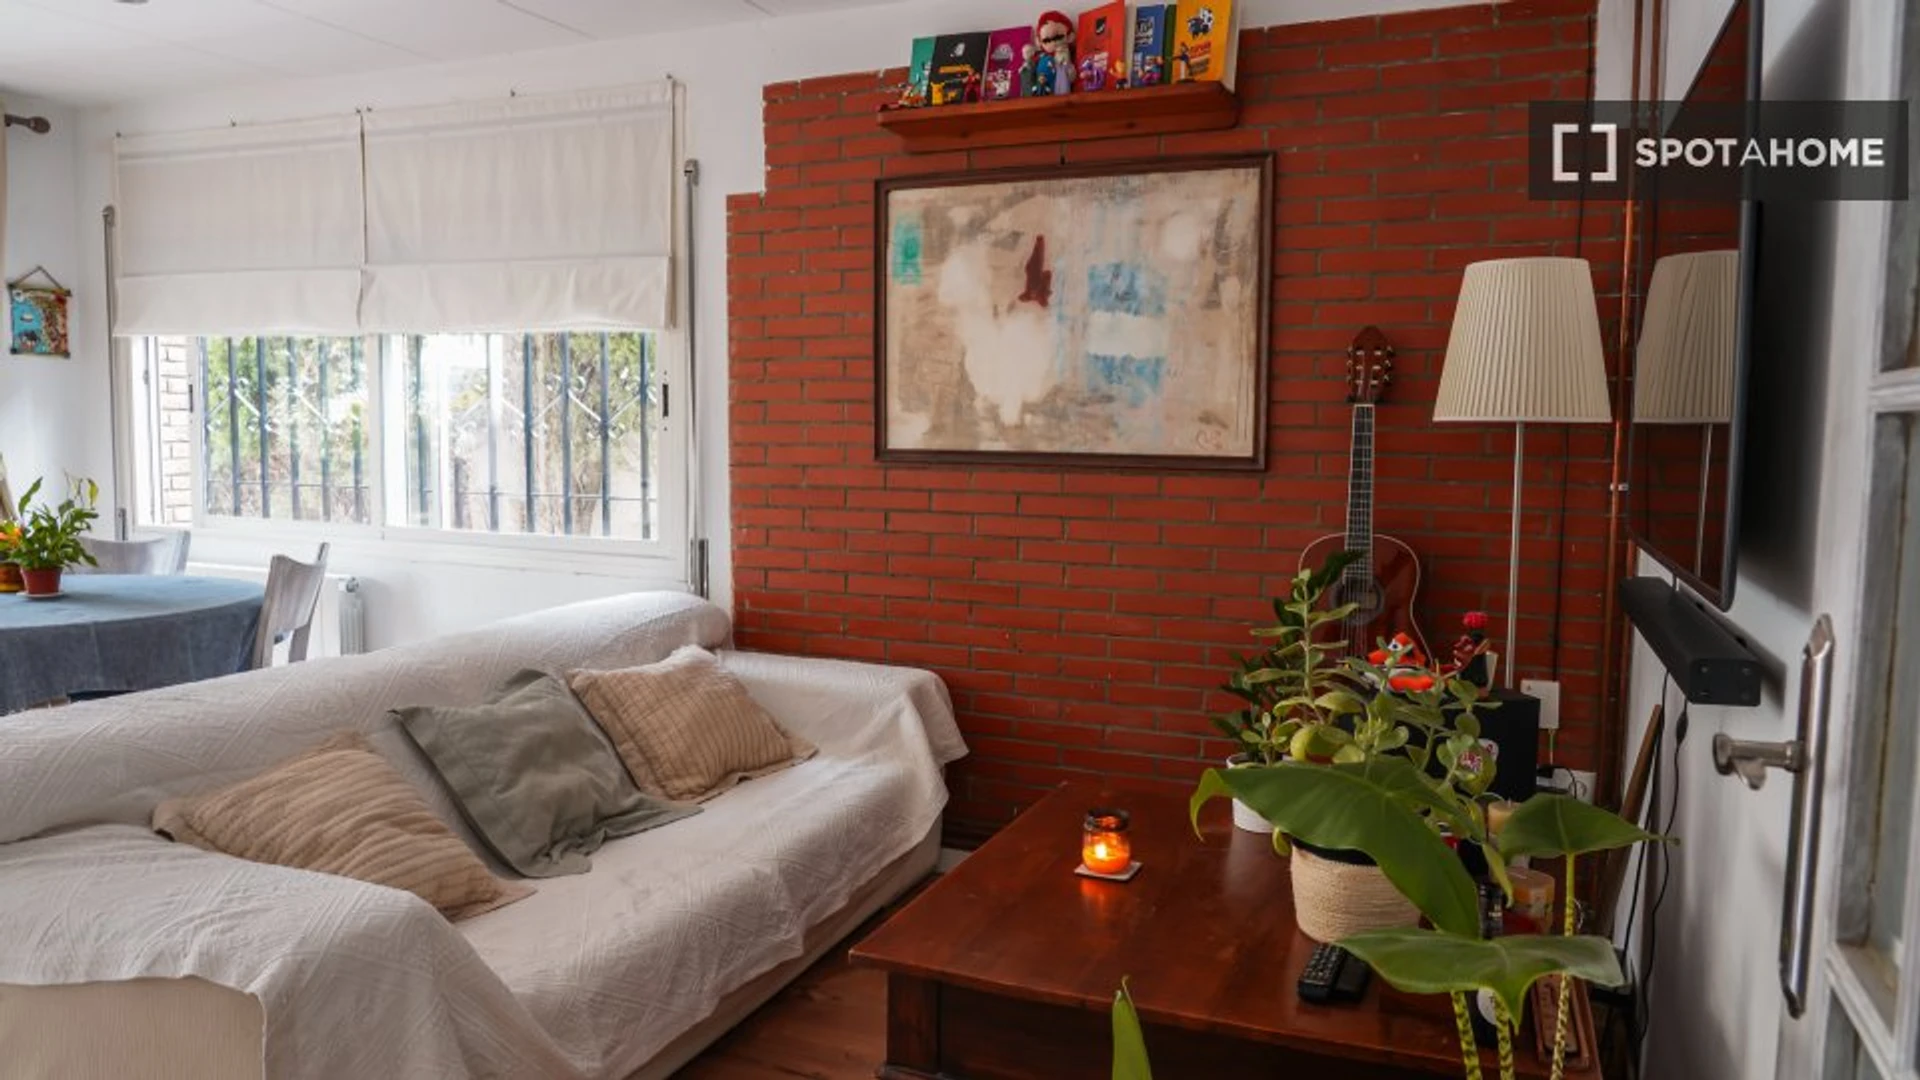 Accommodation in the centre of Castelldefels